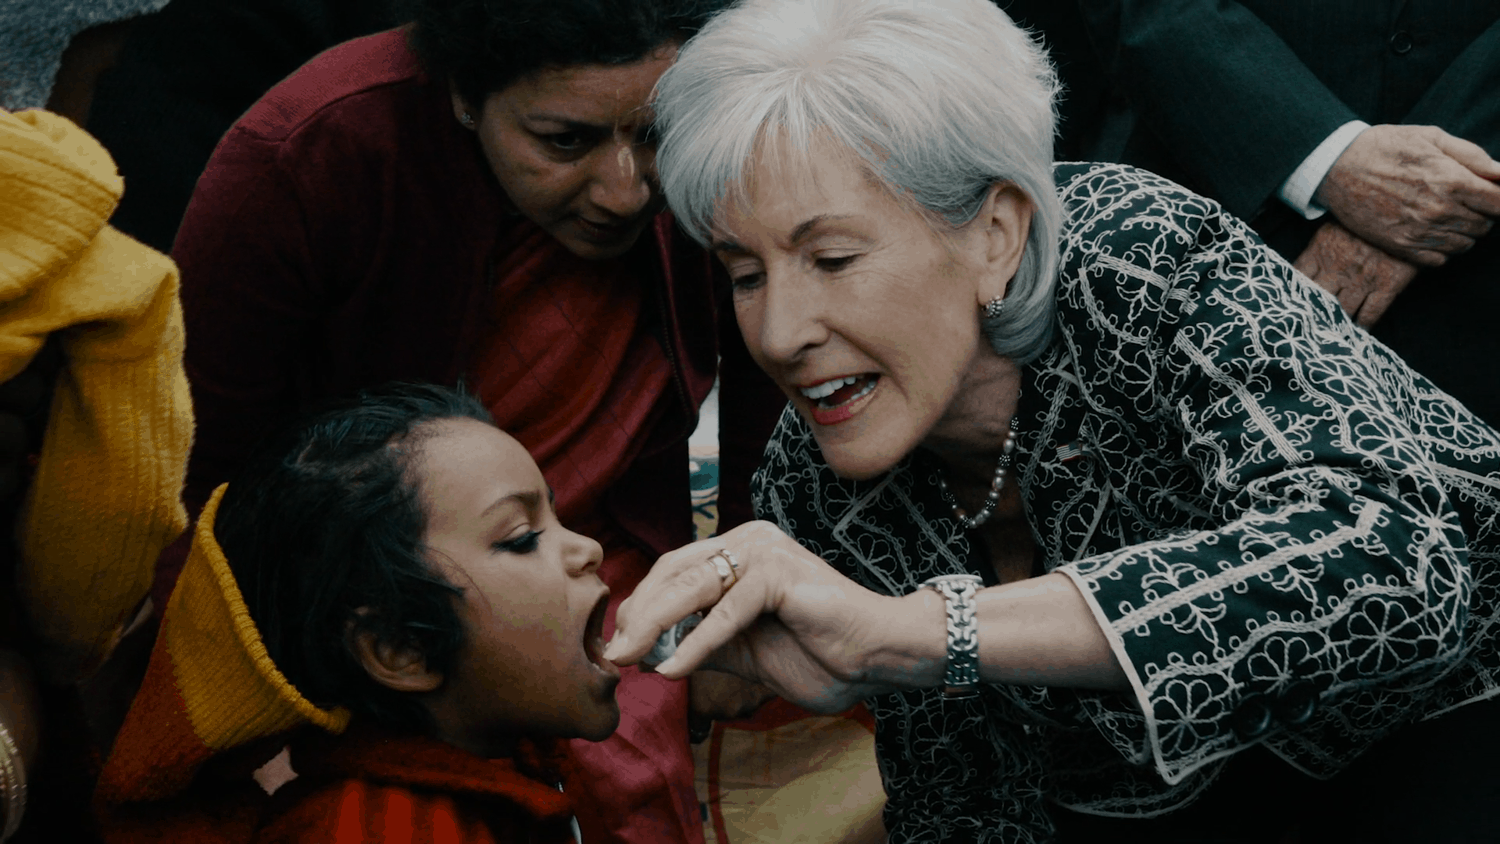 A business woman gives medicine to a child in need